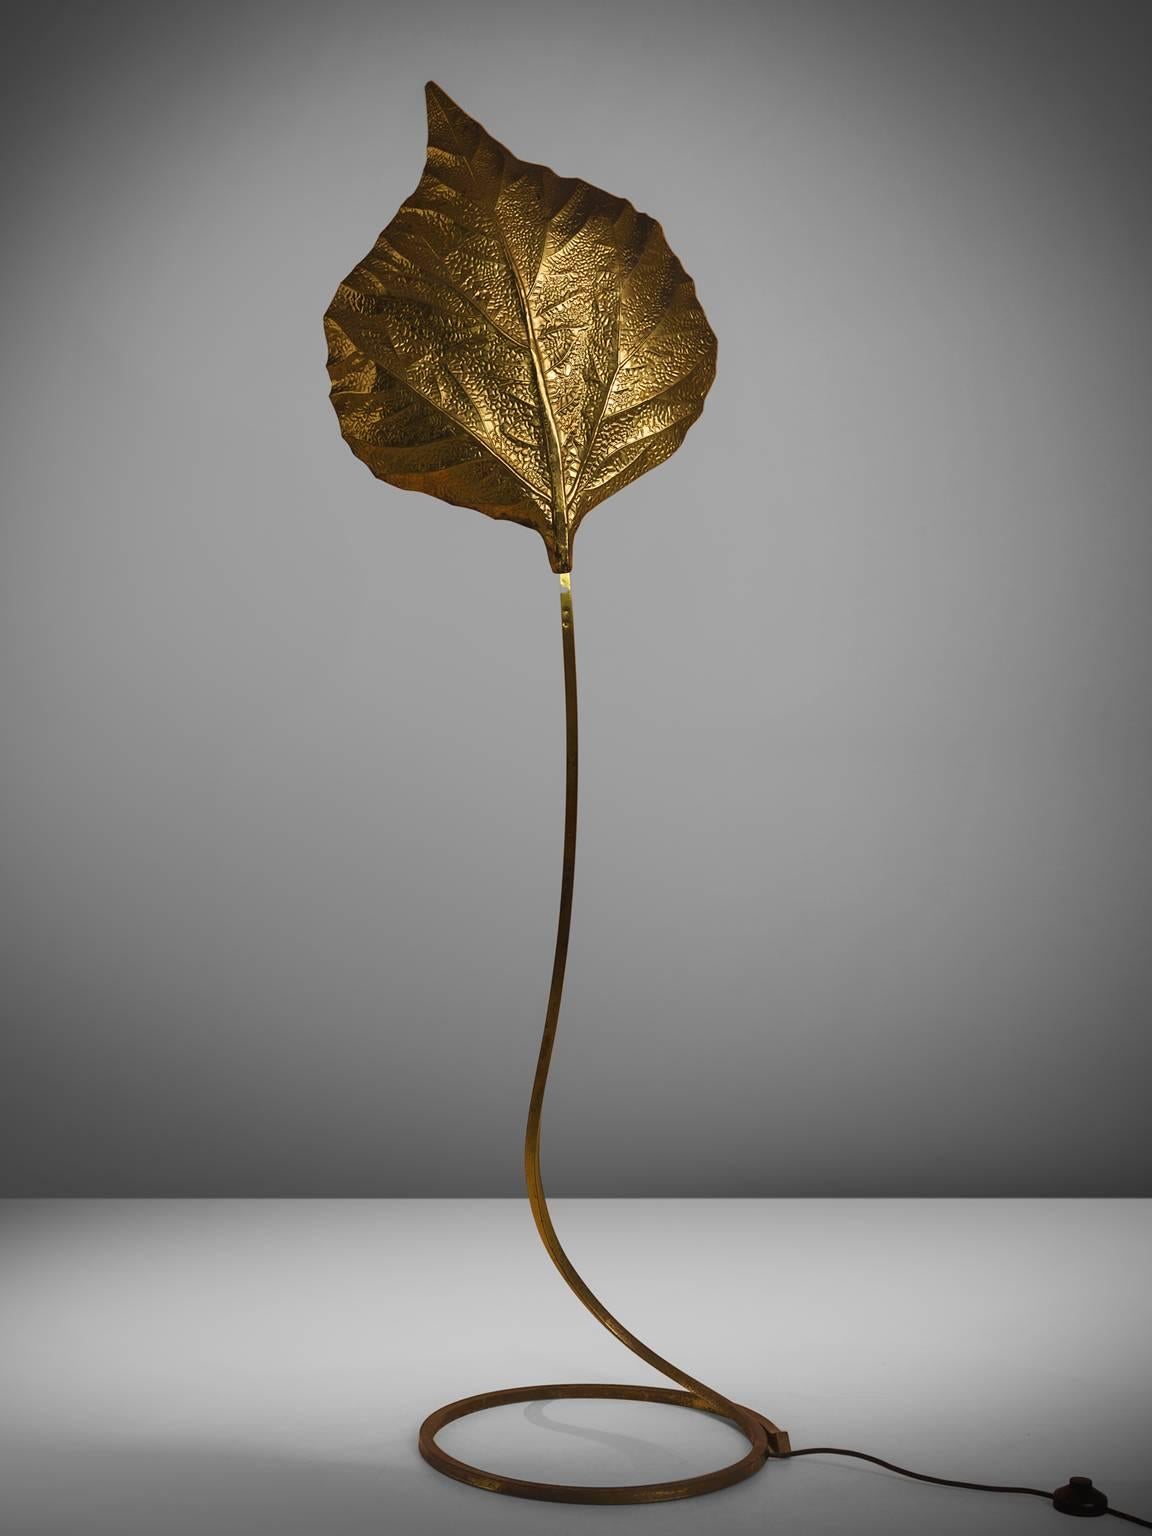 Carlo Giorgi for Bottega Gadda, brass 'rhubarb' leaf lamp, Italy, 1970s

This large single leaf floor lamp is designed by Carlo Giorgi and produced in Italy in the 1970s. This biomorphic, hand-hammered brass floor lamp resembles a large rhubarb